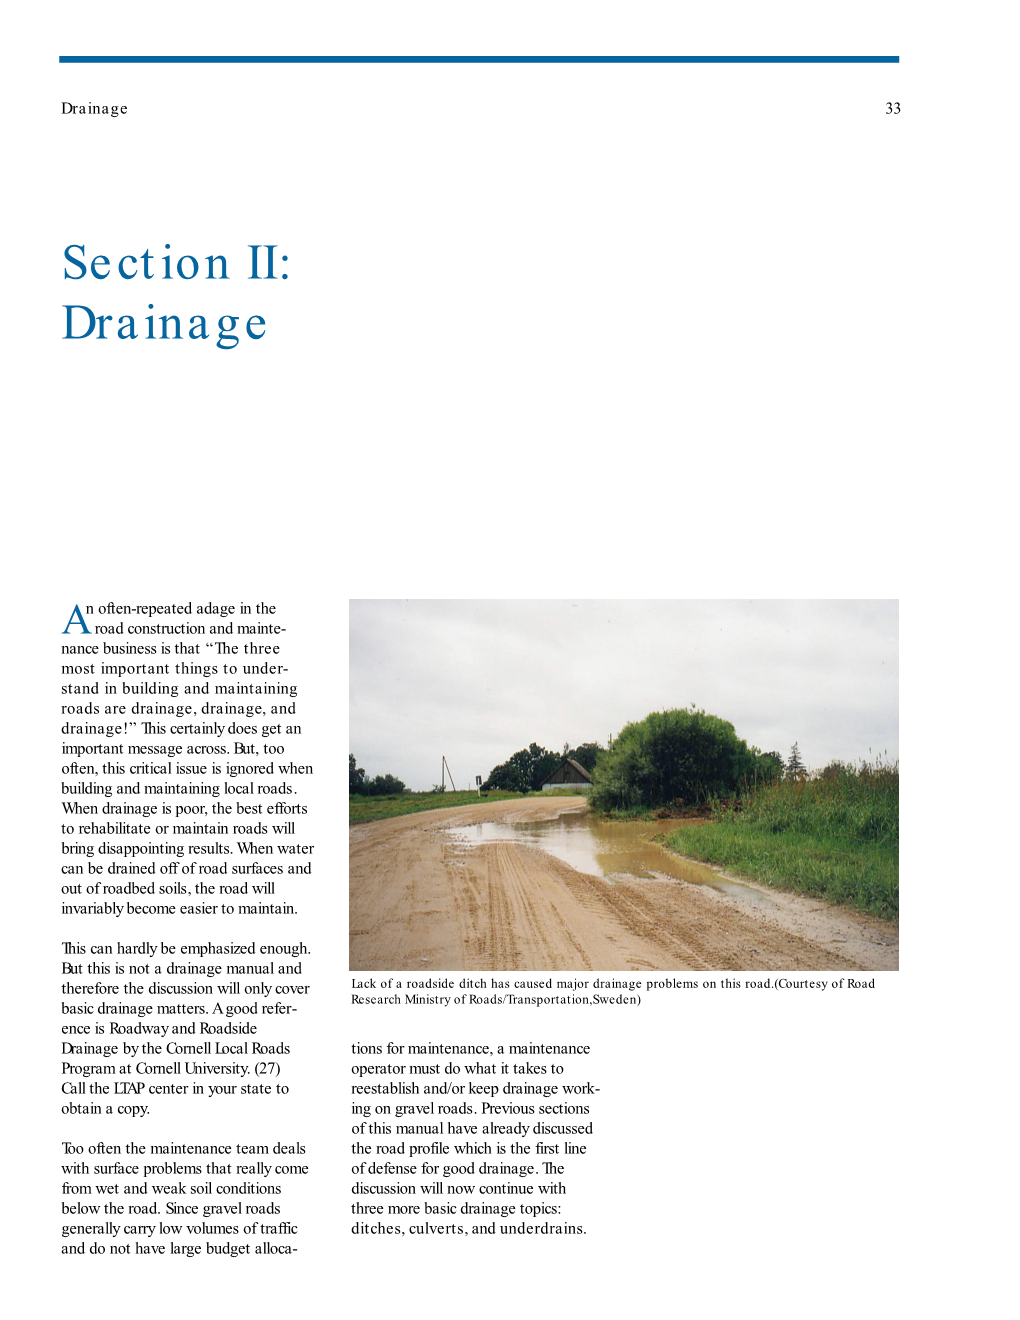 Gravel Roads: Maintenance and Design Manual-- Section II: Drainage